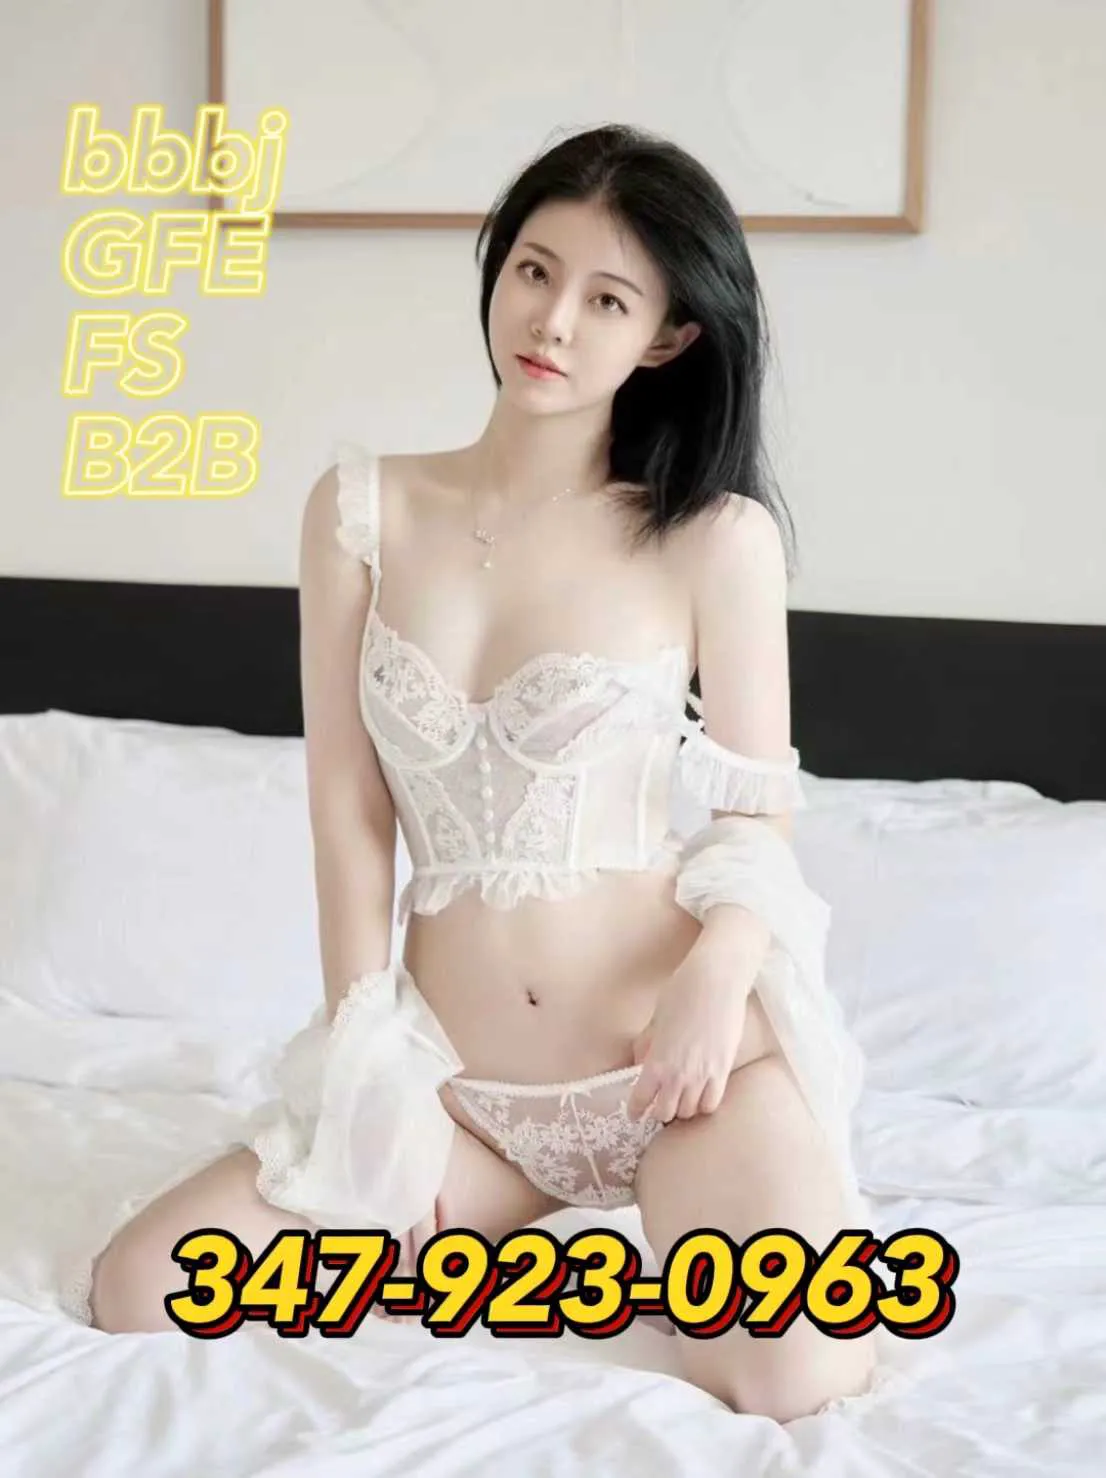 Reviews about escort with phone number 3479230963